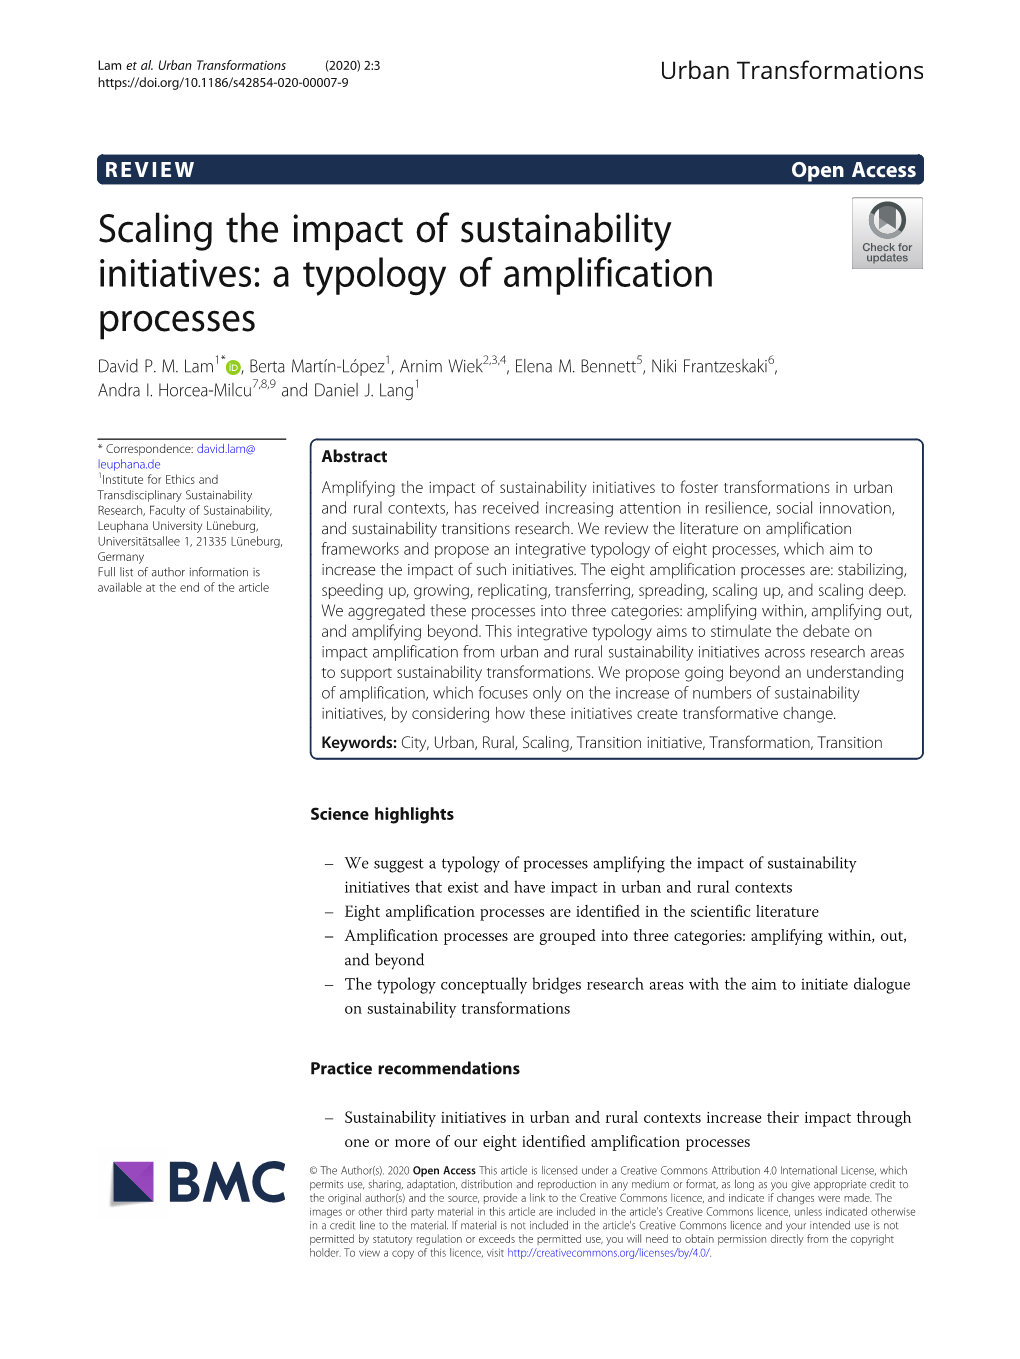 Scaling the Impact of Sustainability Initiatives: a Typology of Amplification Processes David P